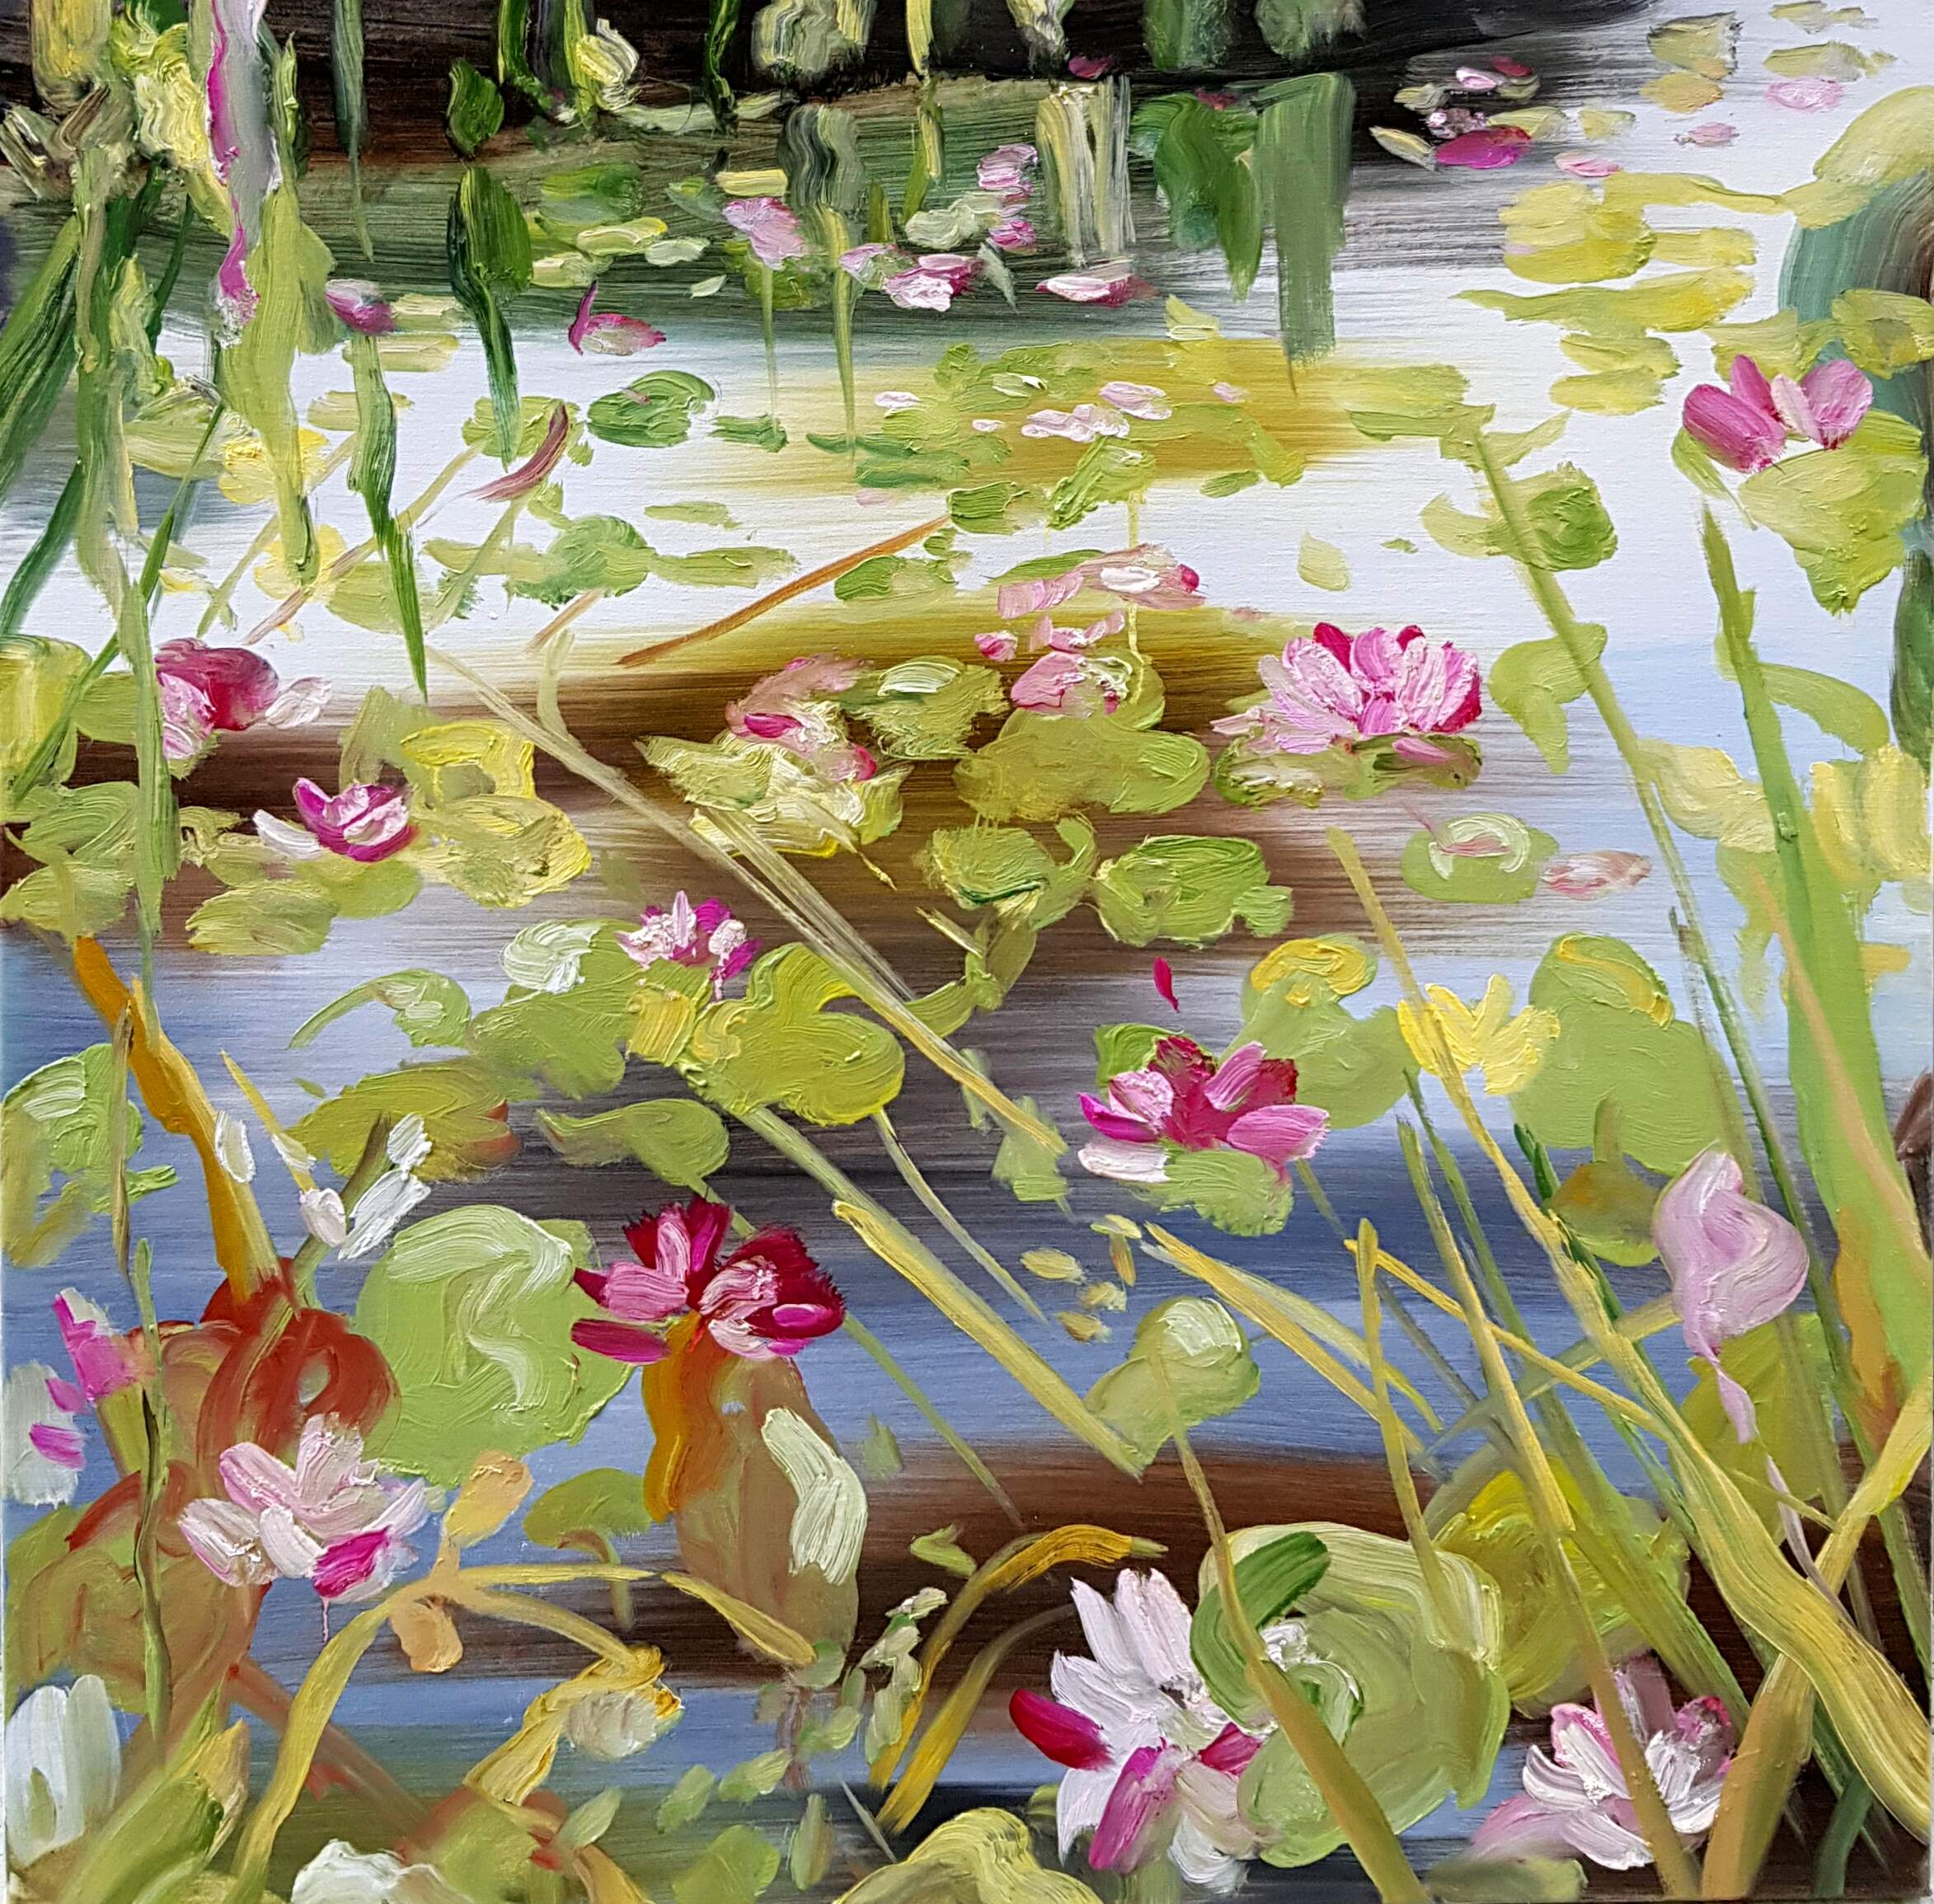 The water lilies I